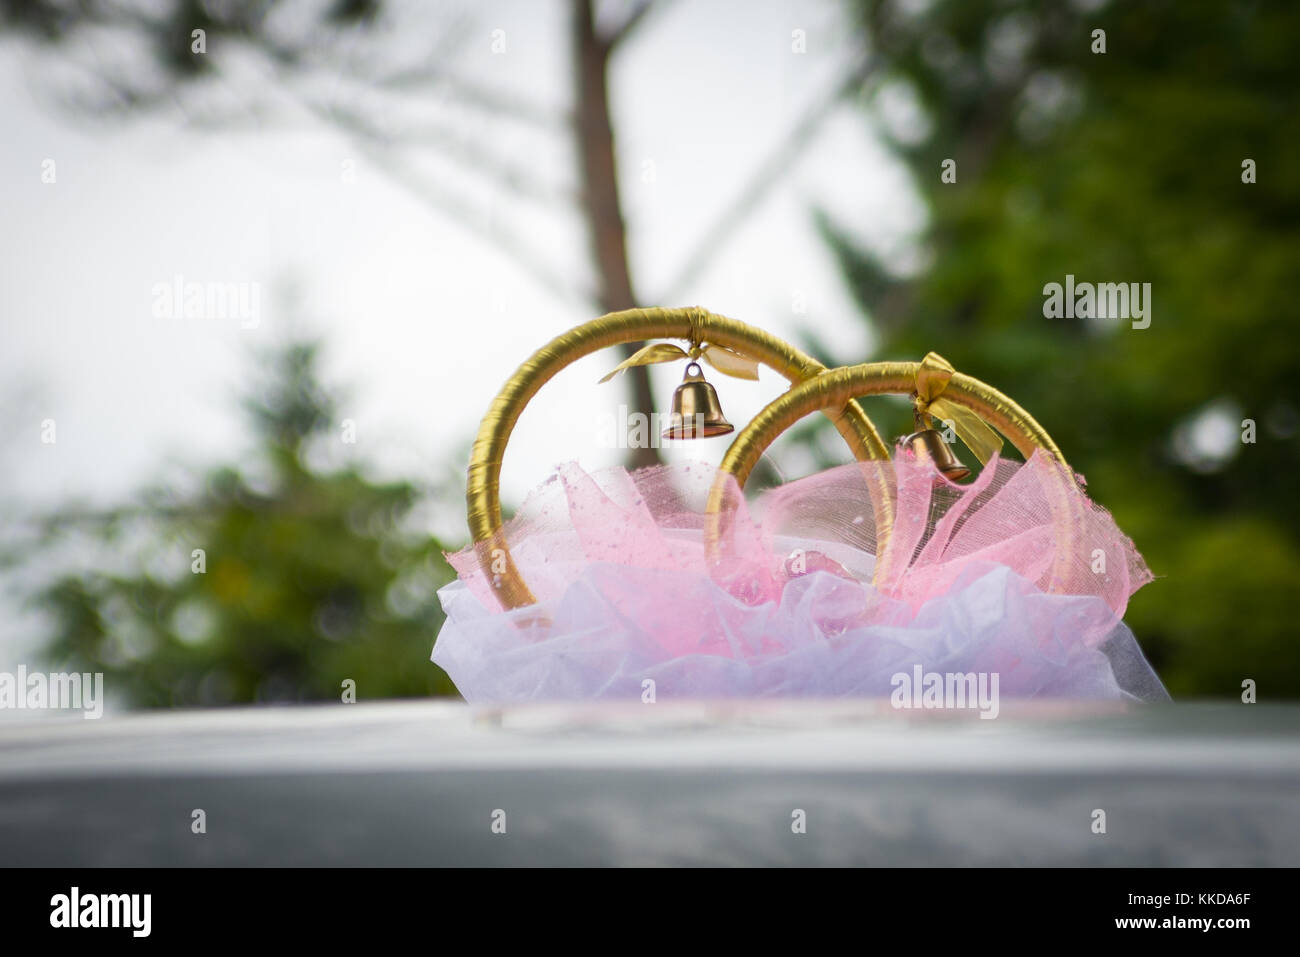 Wedding rings and decoration on the roof of the car on outdoor blurred green background. Stock Photo